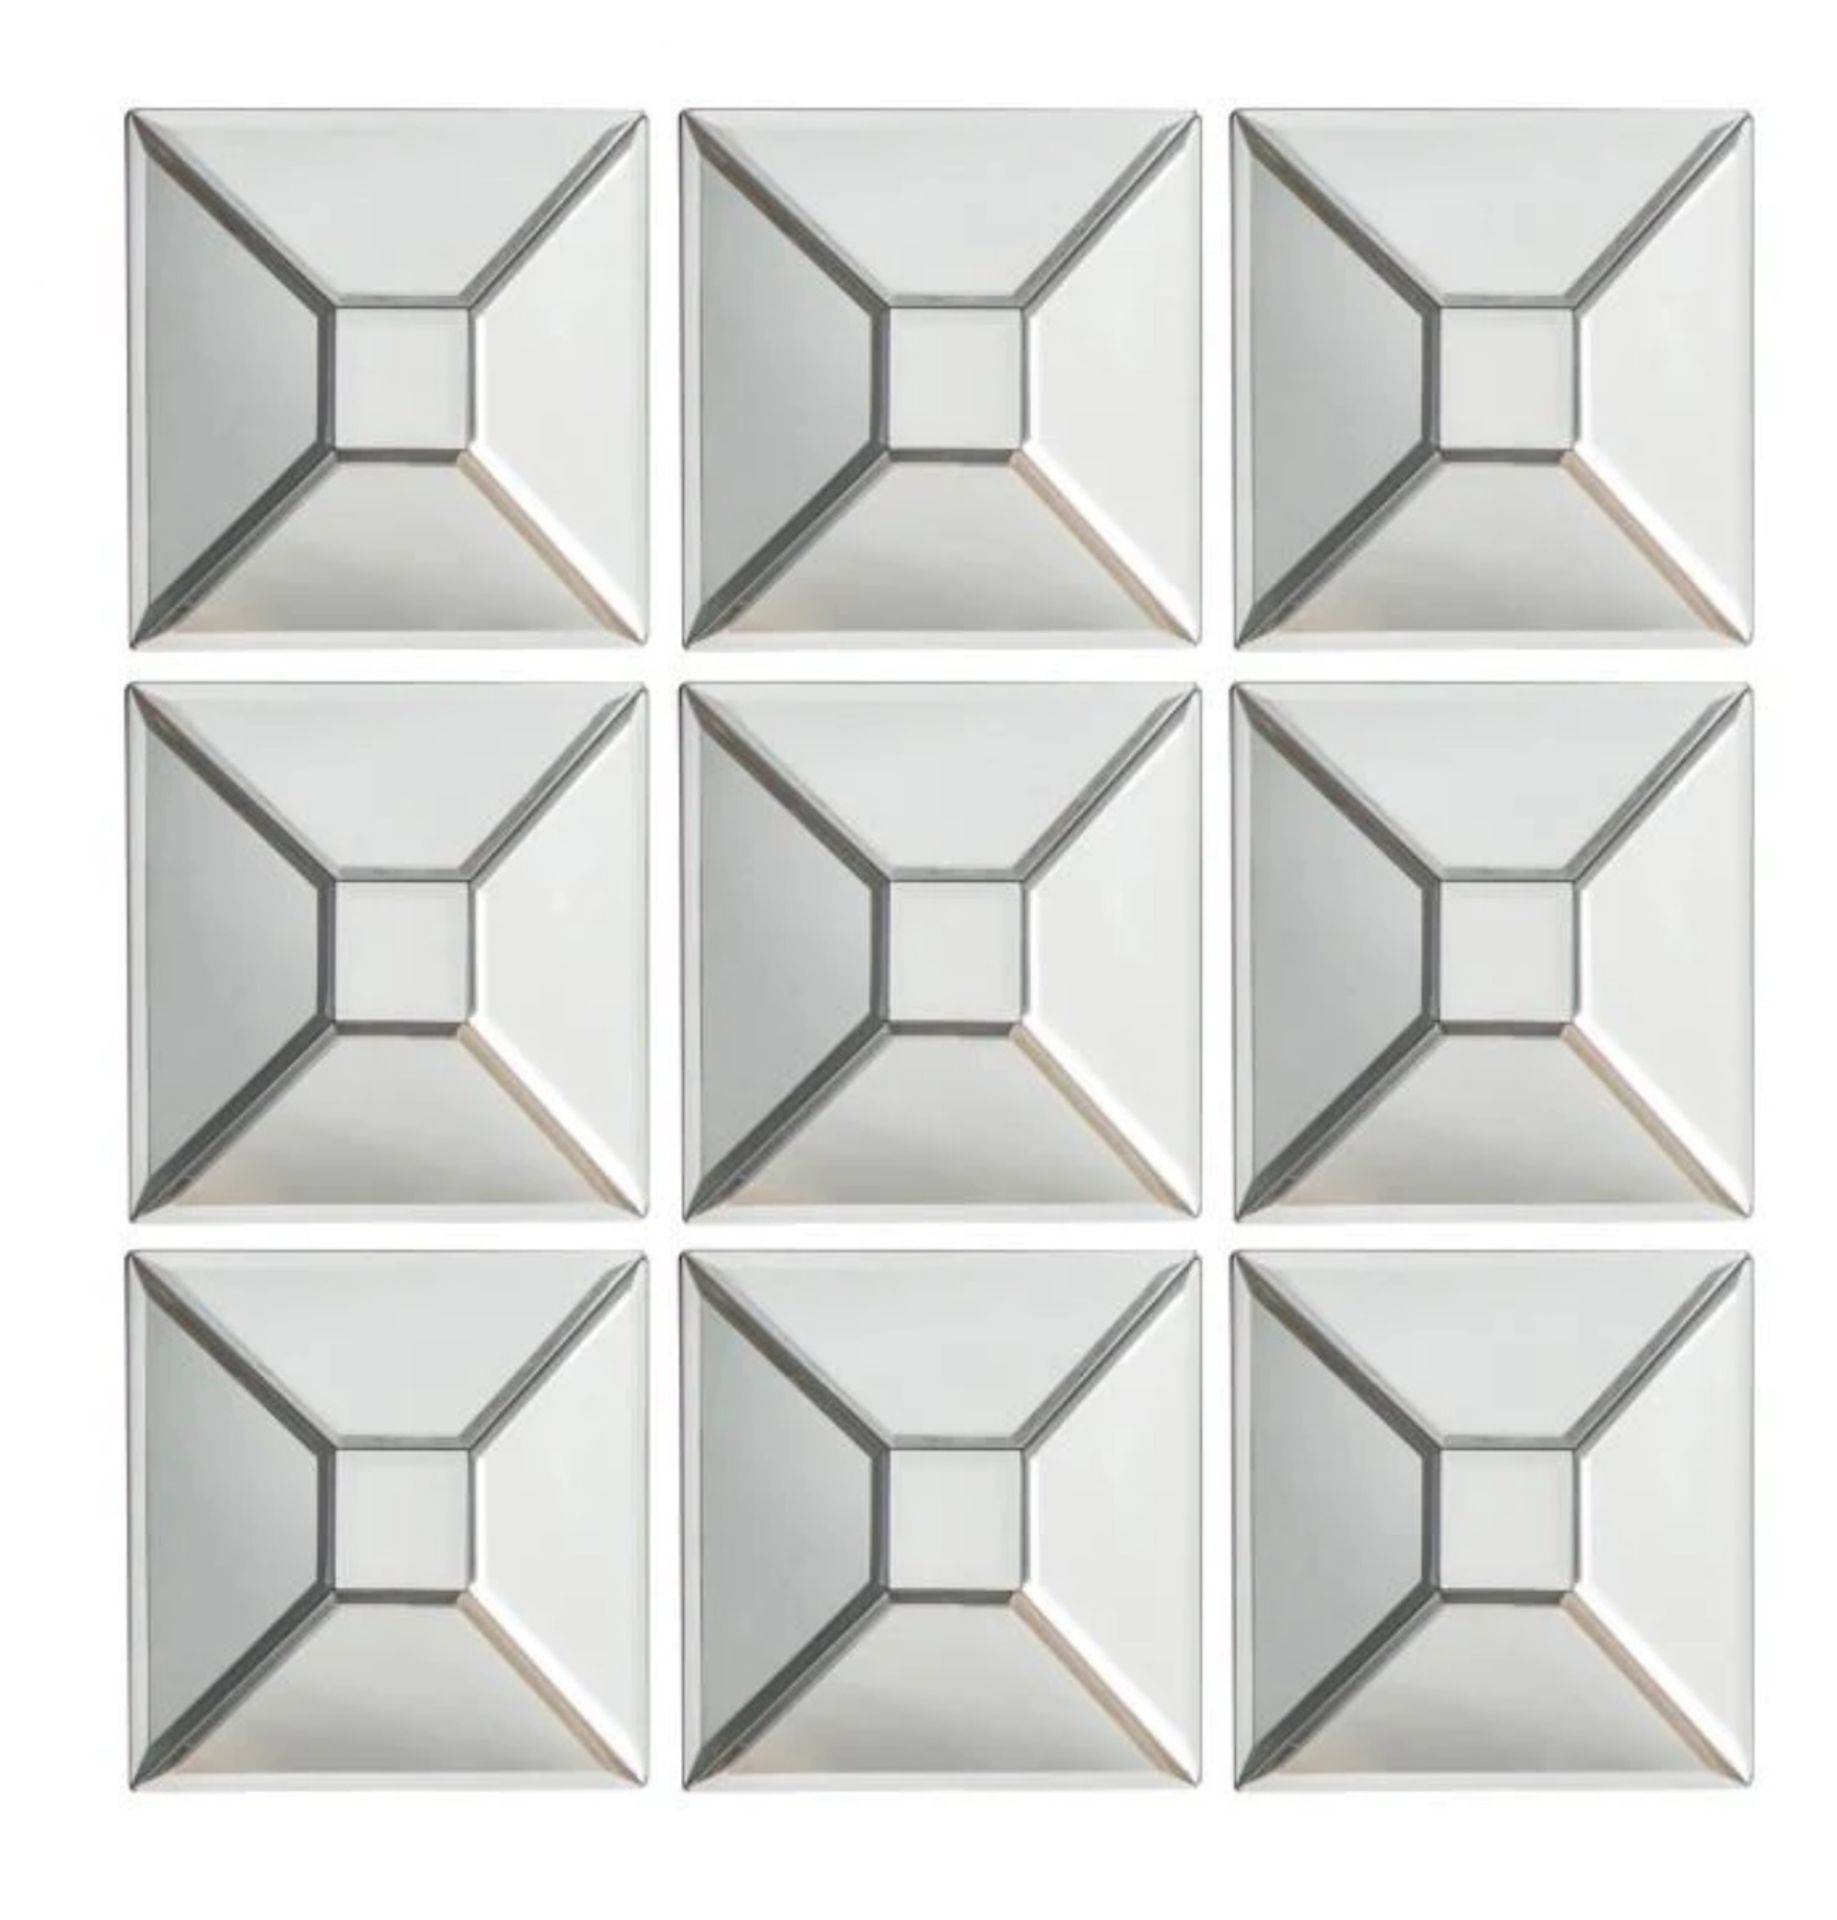 Paquin Mirrors Set Of 9 The Paquin Mirrors can be hung individually, but look fantastic when grouped